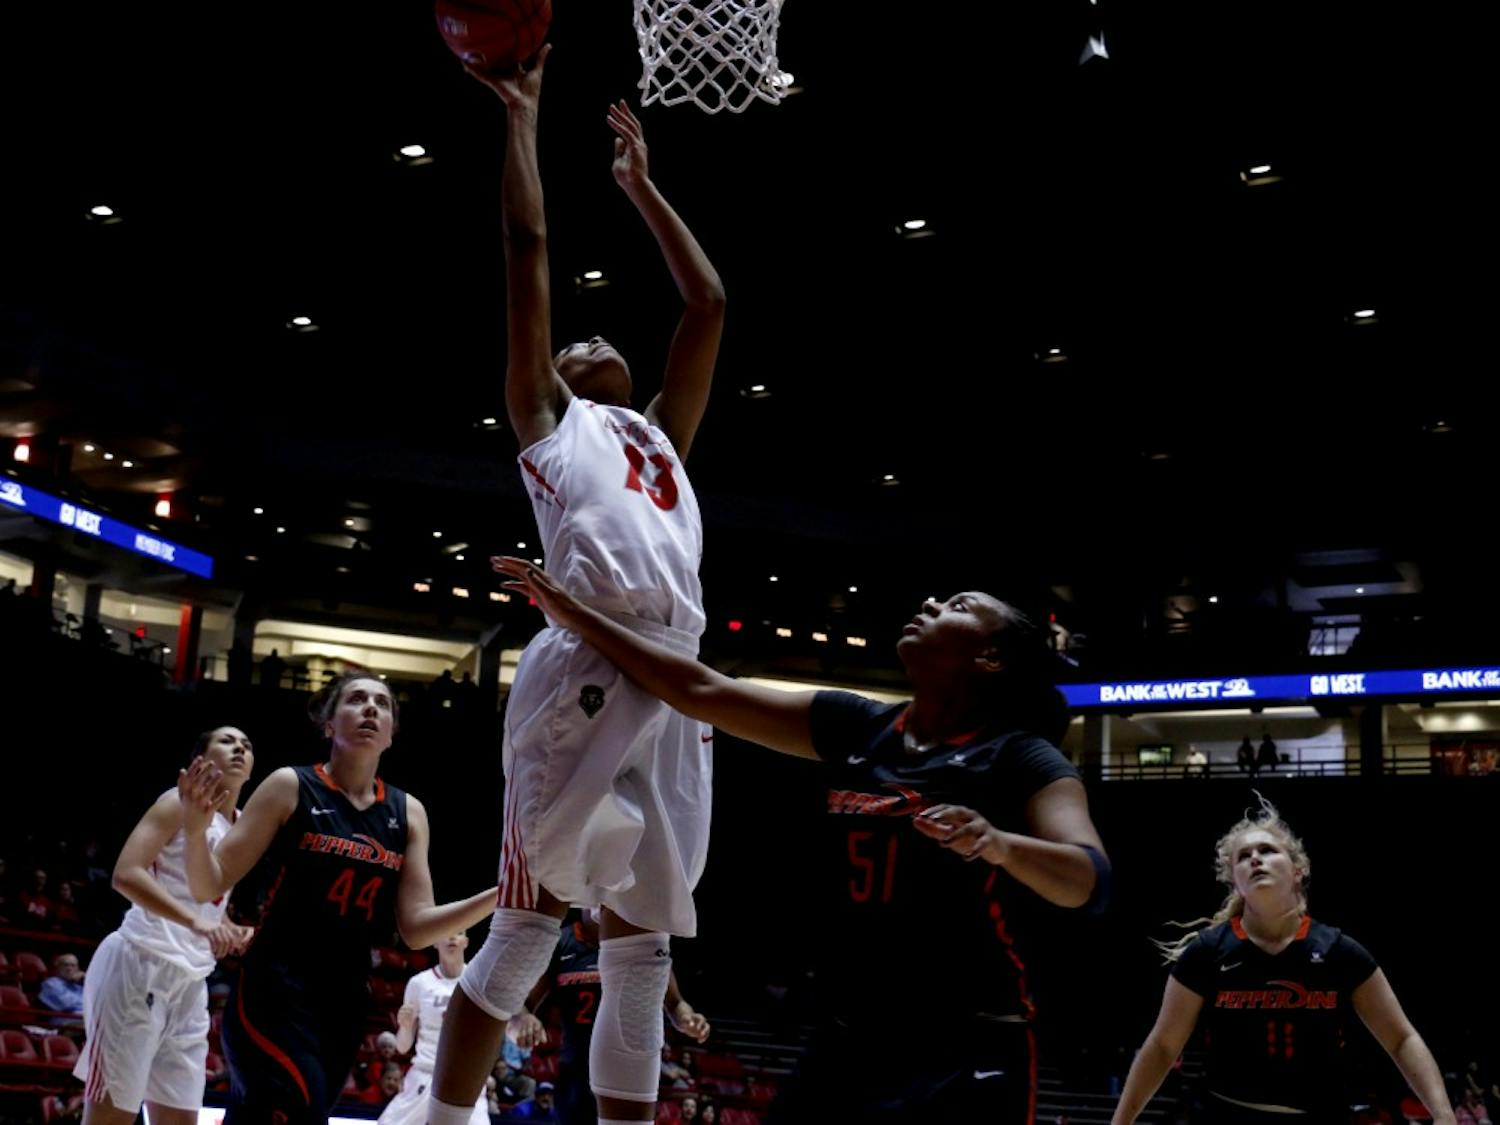 Senior forward Khadijah Shumpert leaps for a lay up at WisePies Arena Saturday afternoon. The Lobos beat Pepperdine 60-52.